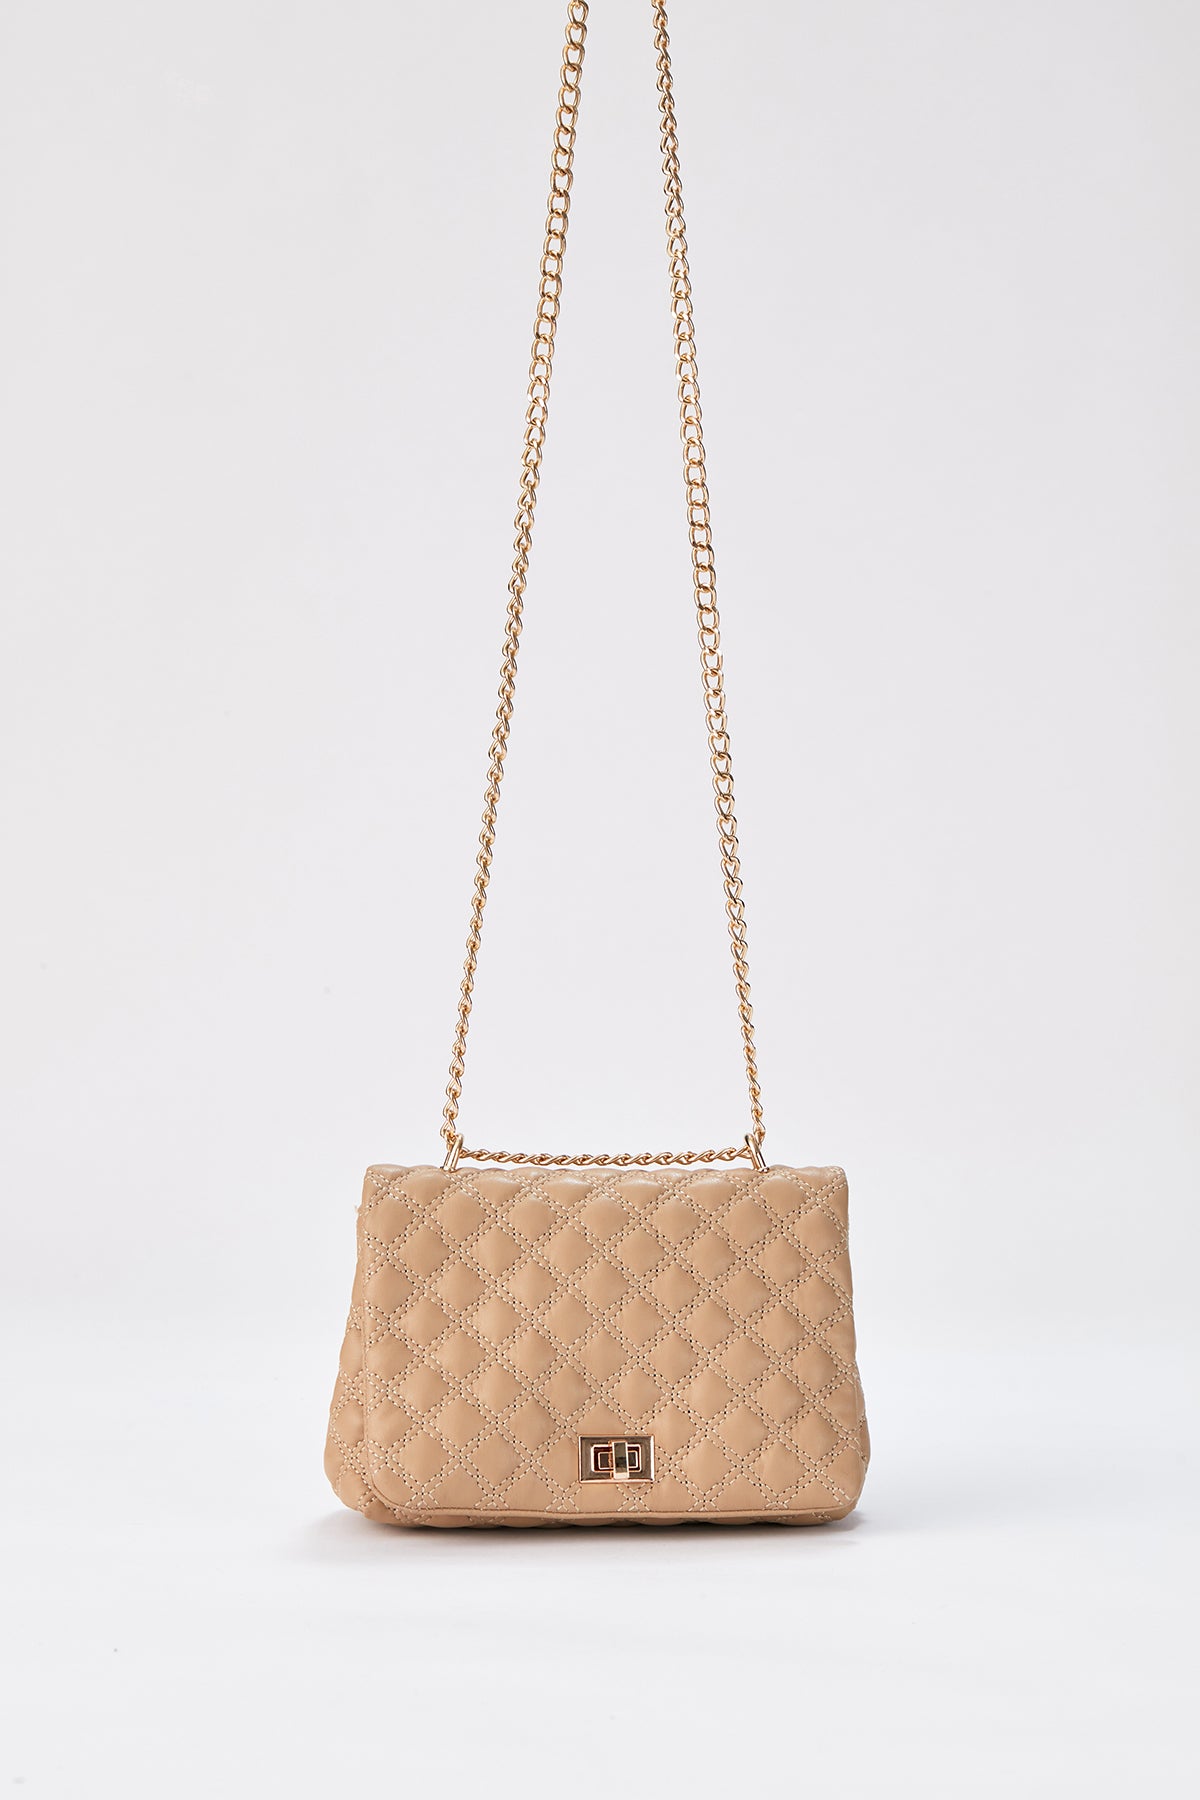 Quilted Plant Based Crossbody Bag - Nude